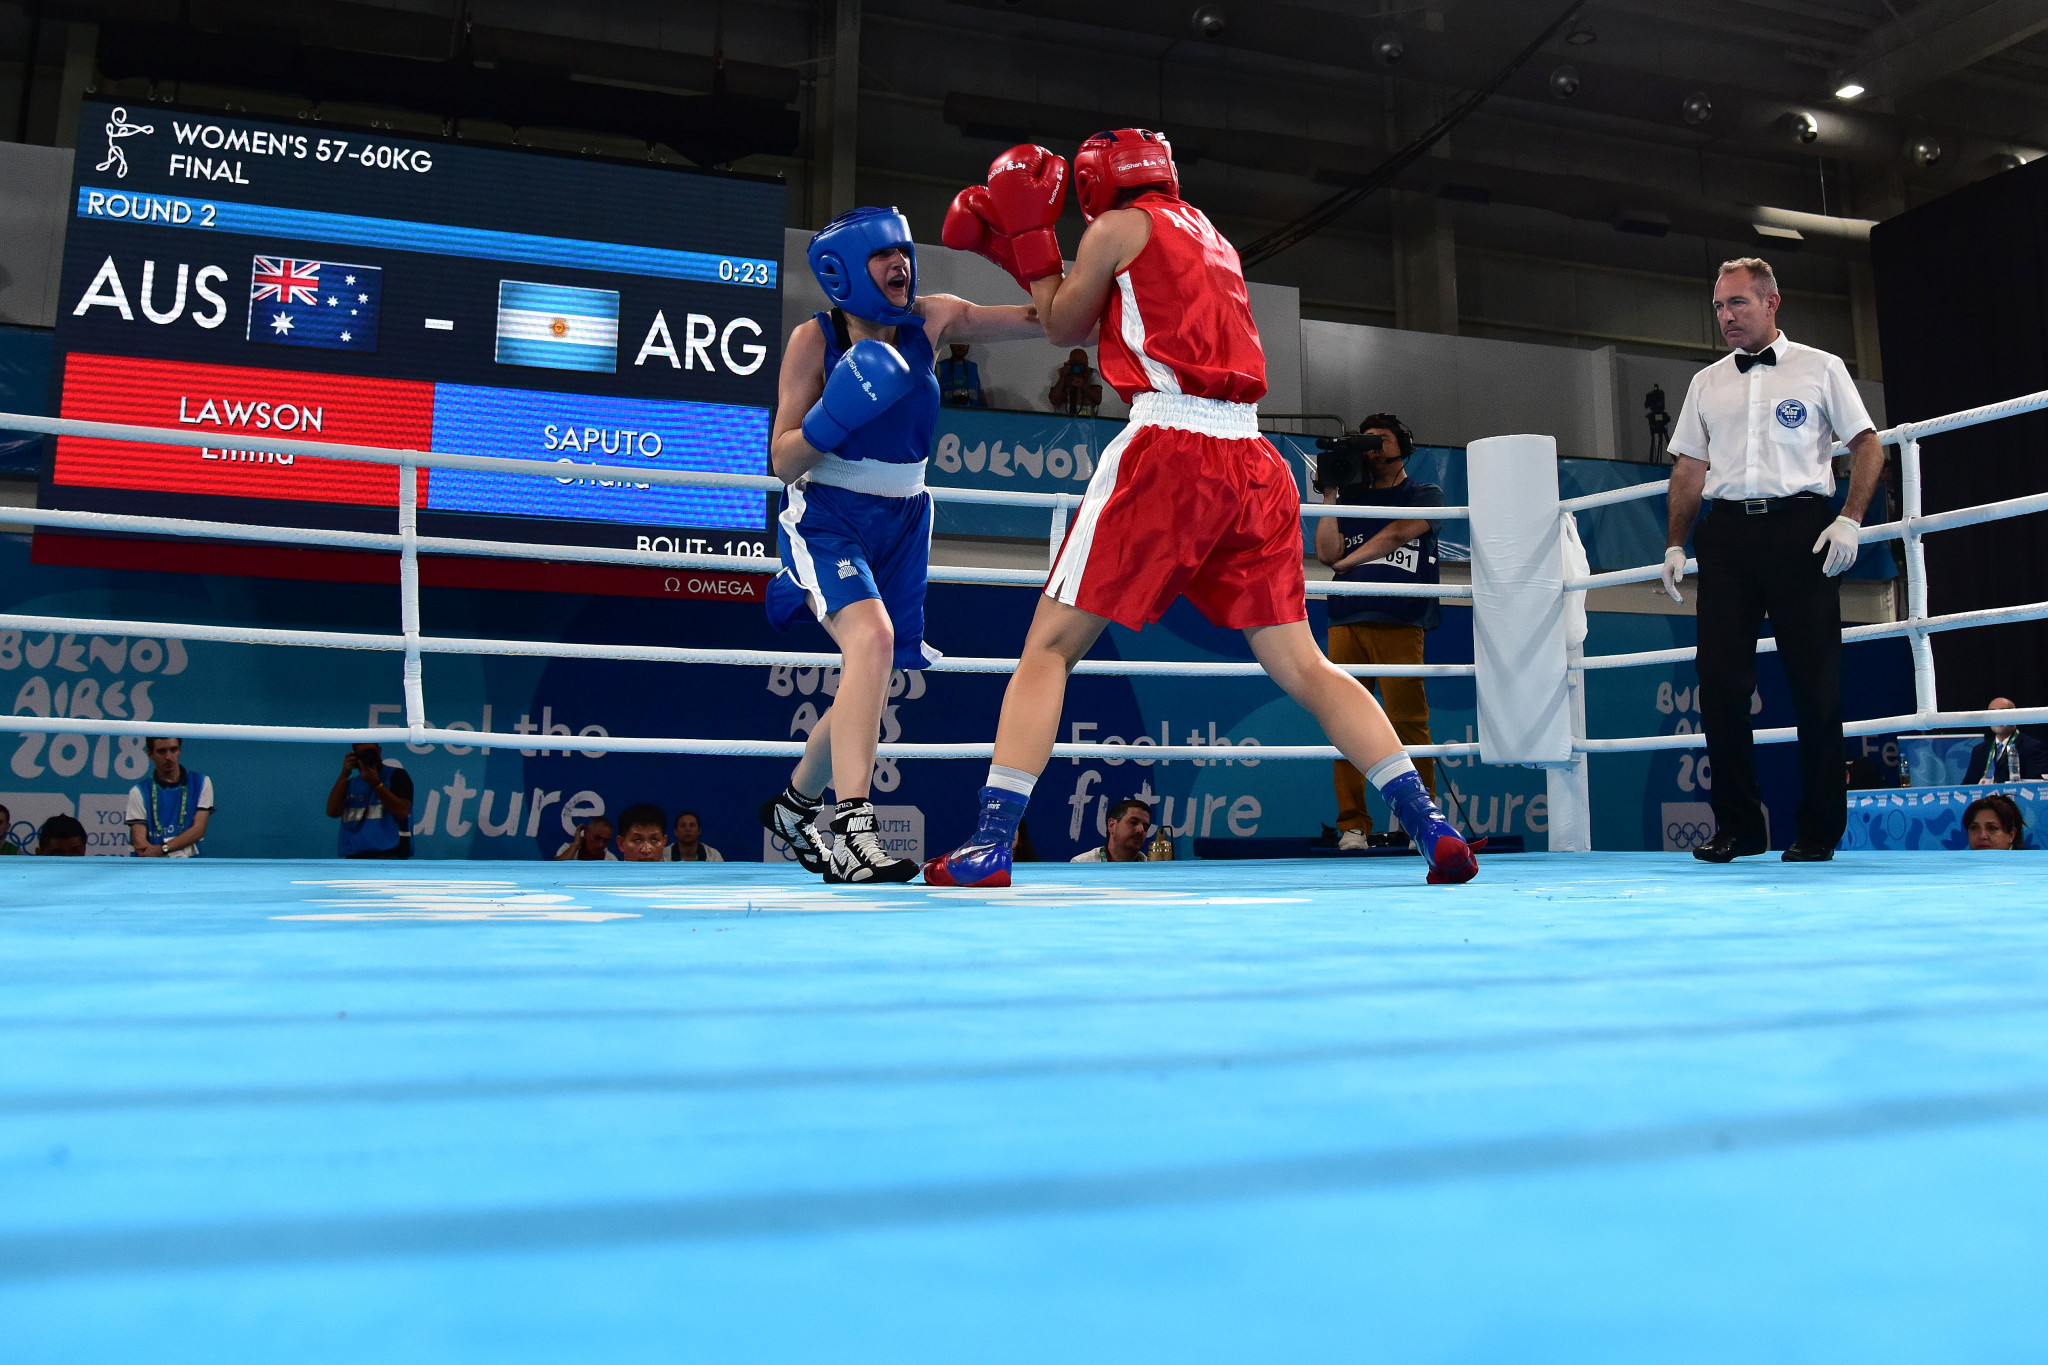 John Coates claimed the IOC had confidence in the sport team in place to continue preparations without the AIBA ©Getty Images